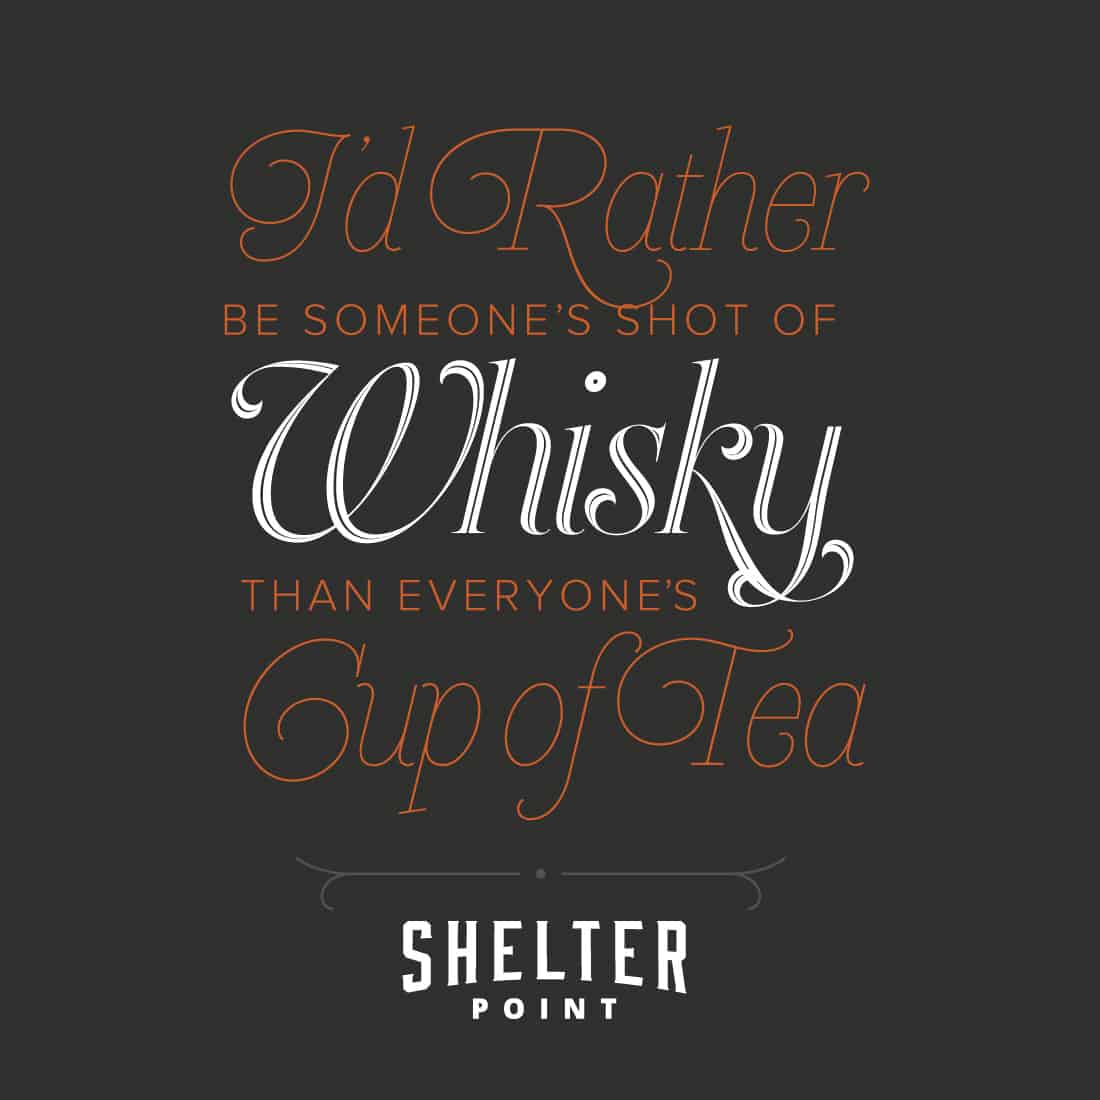 I’d rather be someone’s shot of whisky than everyone’s cup of tea